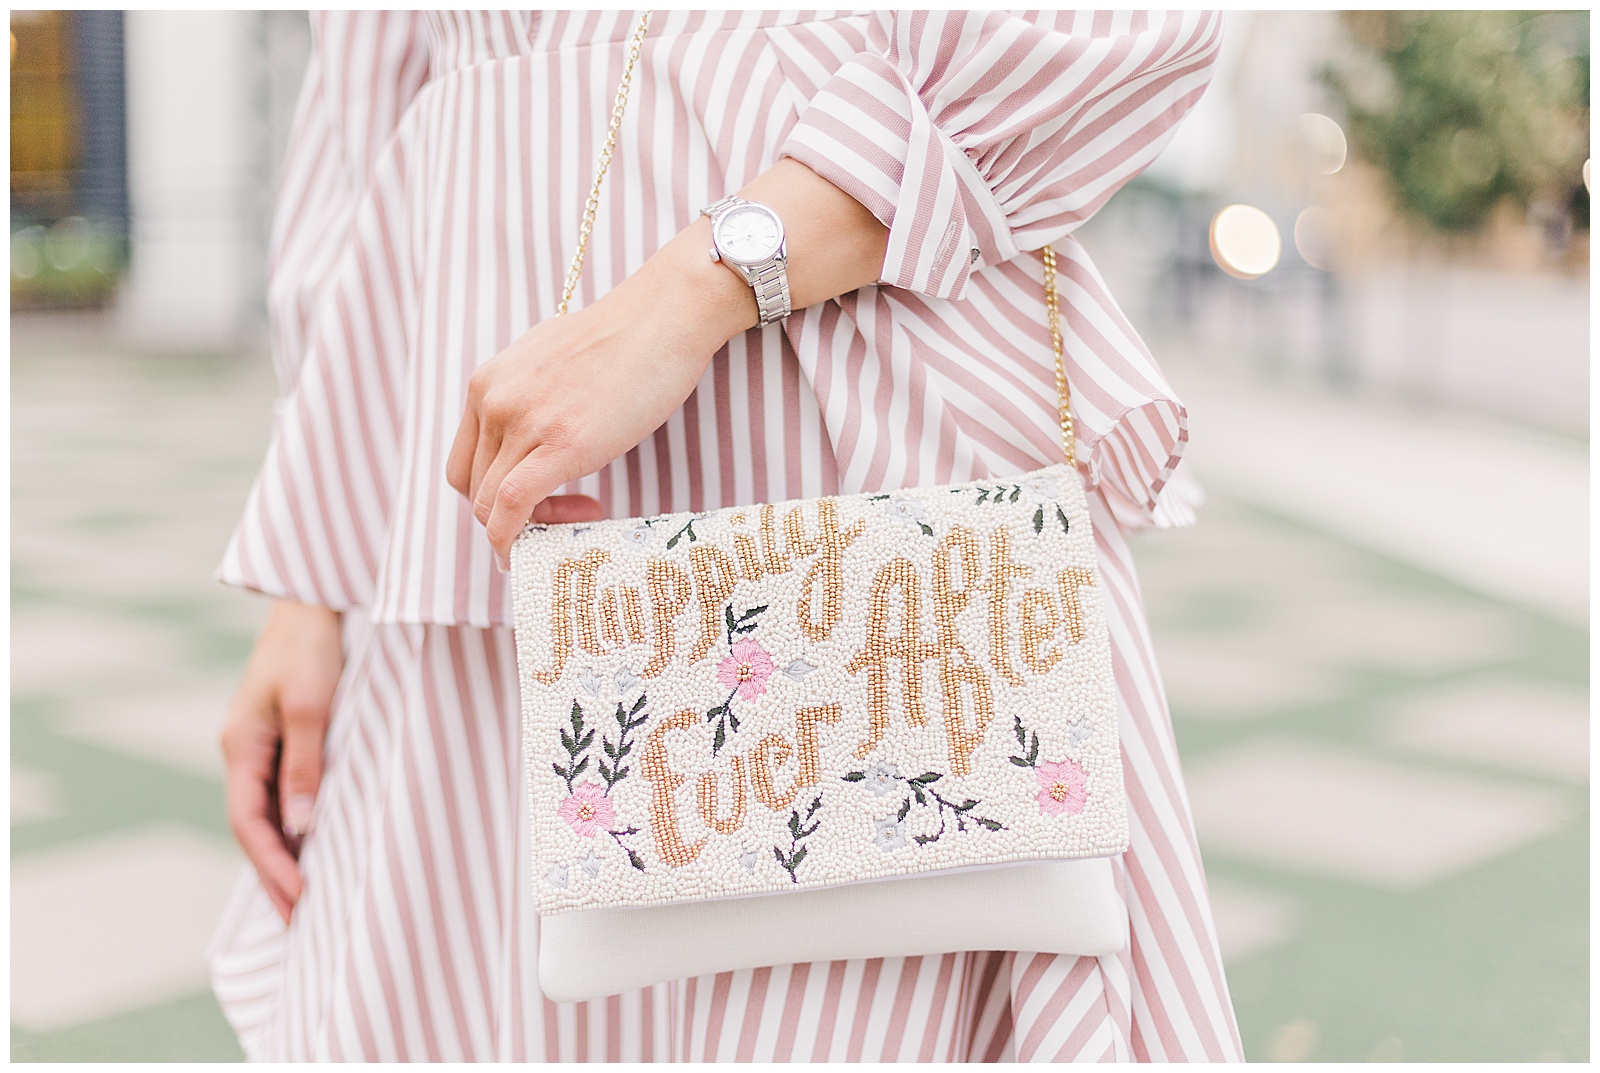 Bride holding "Happily Ever After" purse